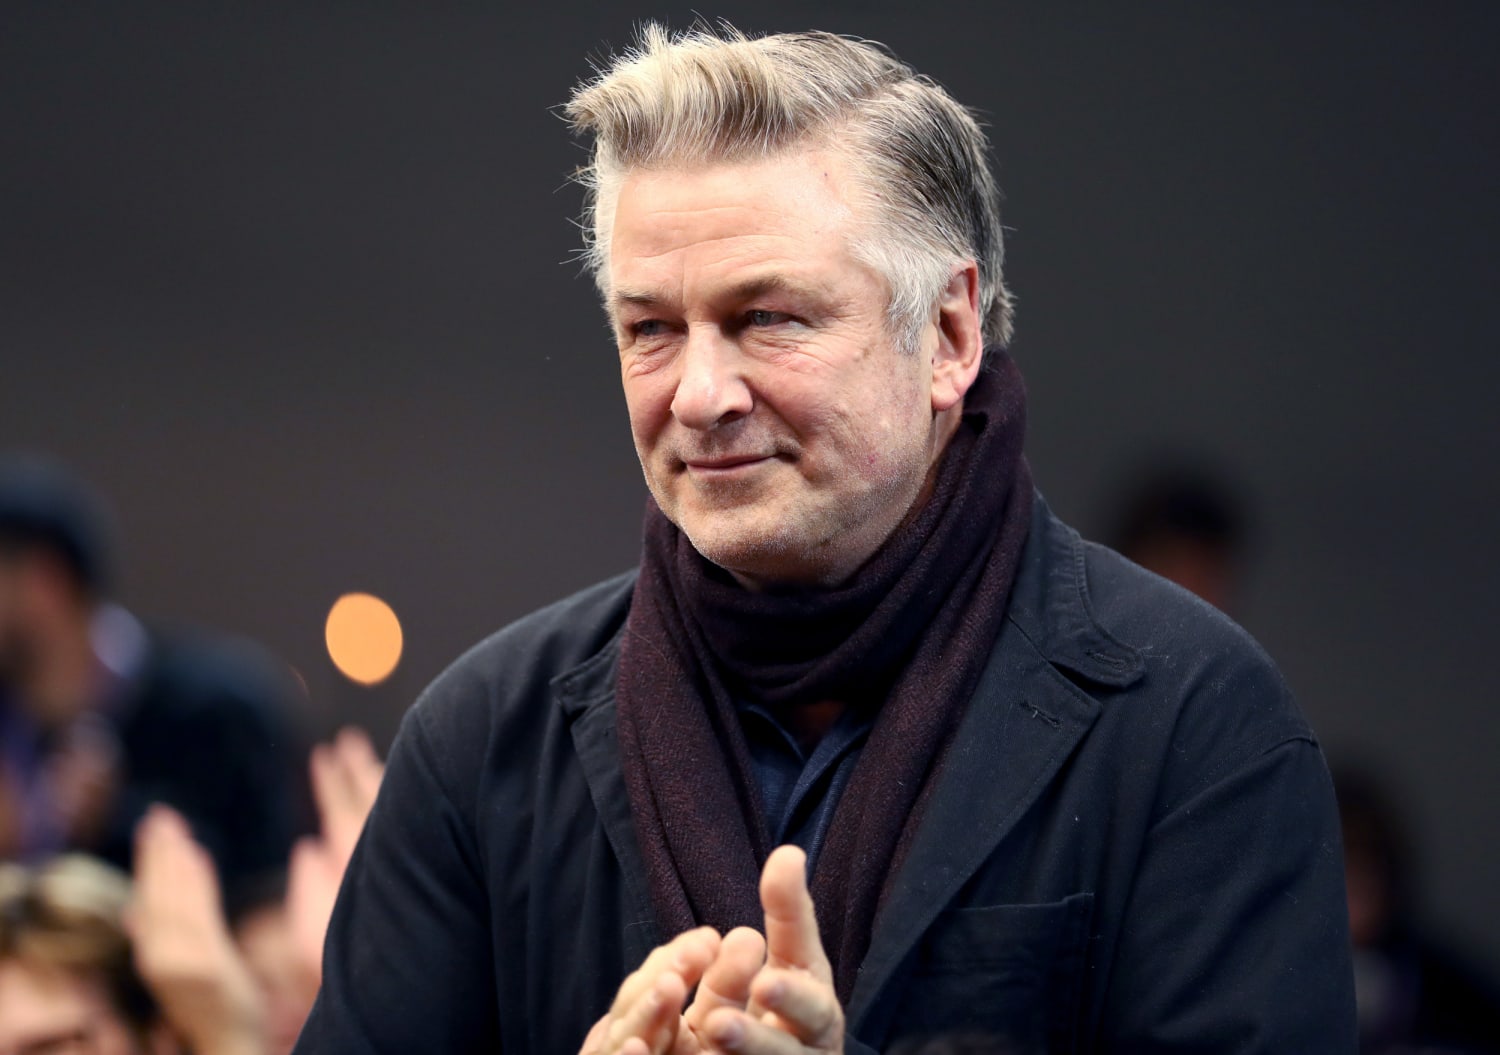 Alec Baldwin pleads not guilty in ‘Rust’ shooting and is allowed to keep working